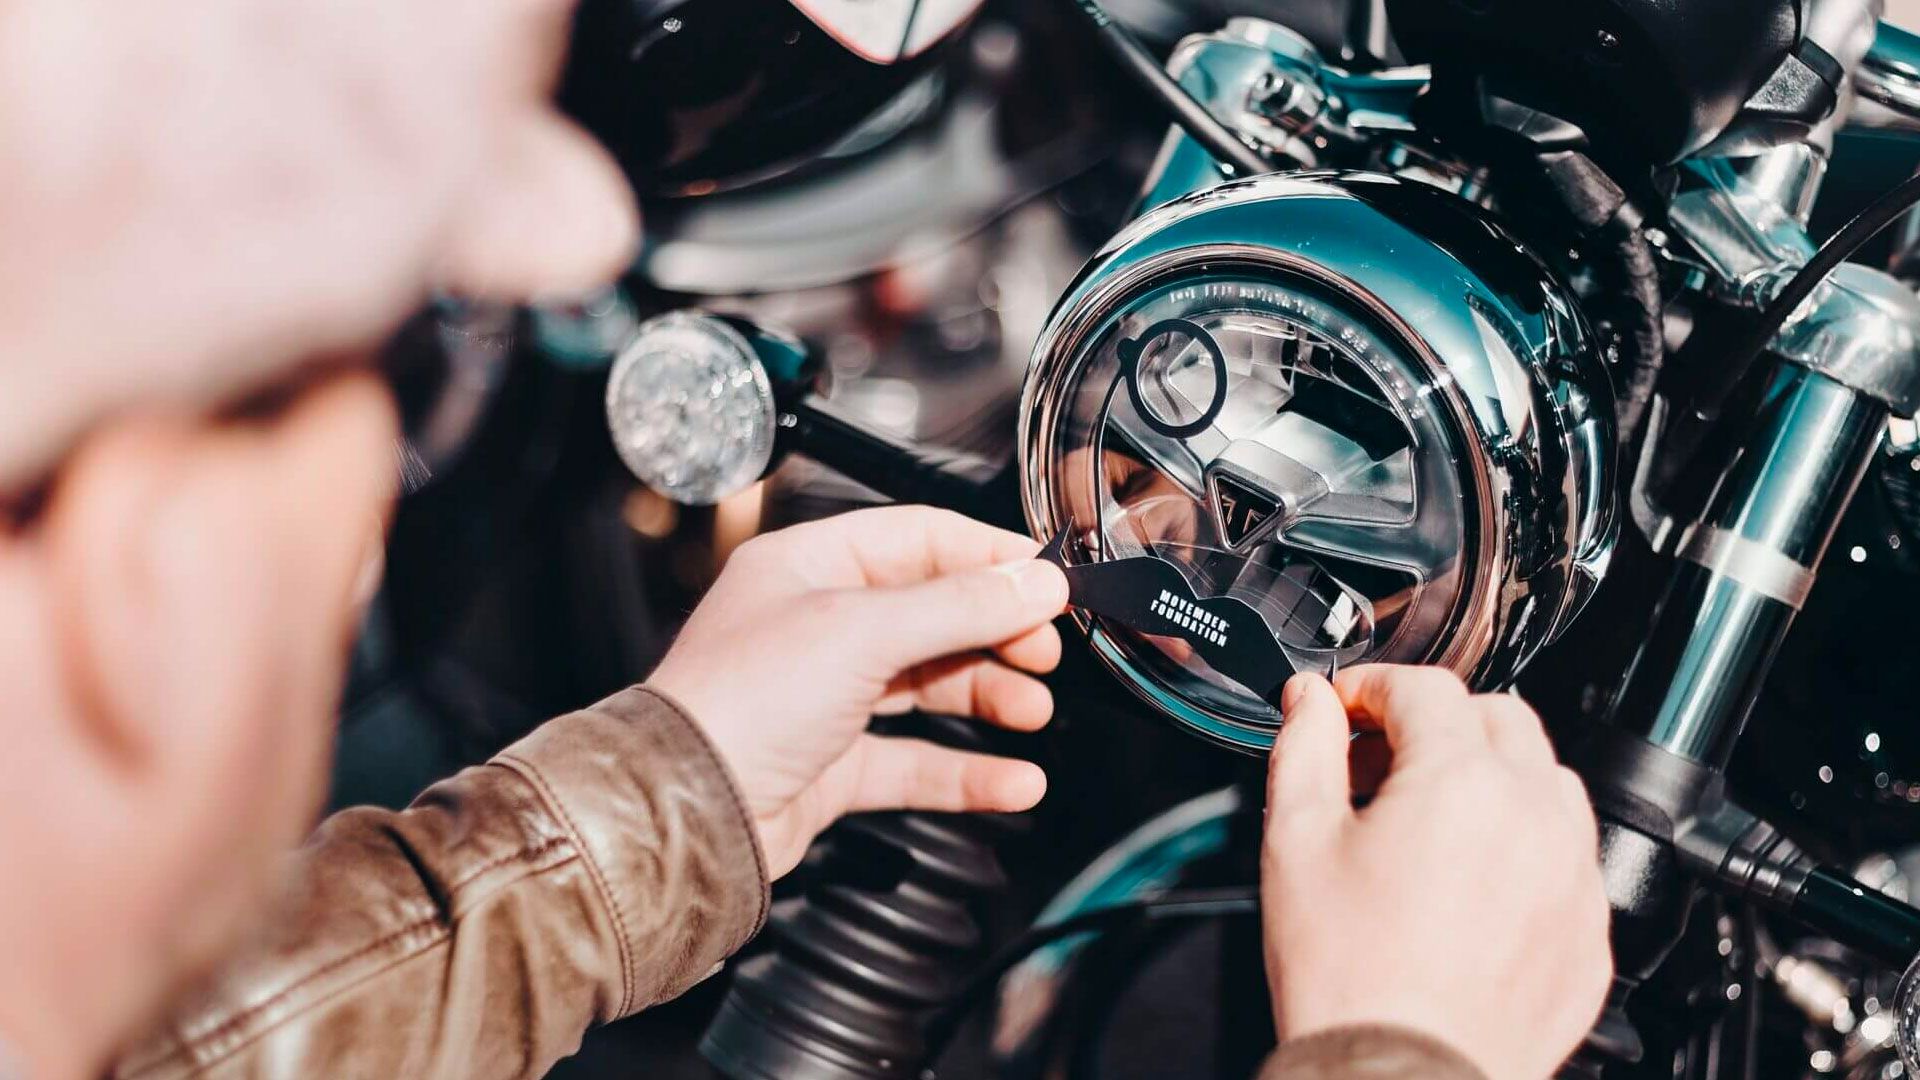 A DGR rider placing a moustache-shaped Movember sticker on their motorcycle headlight.